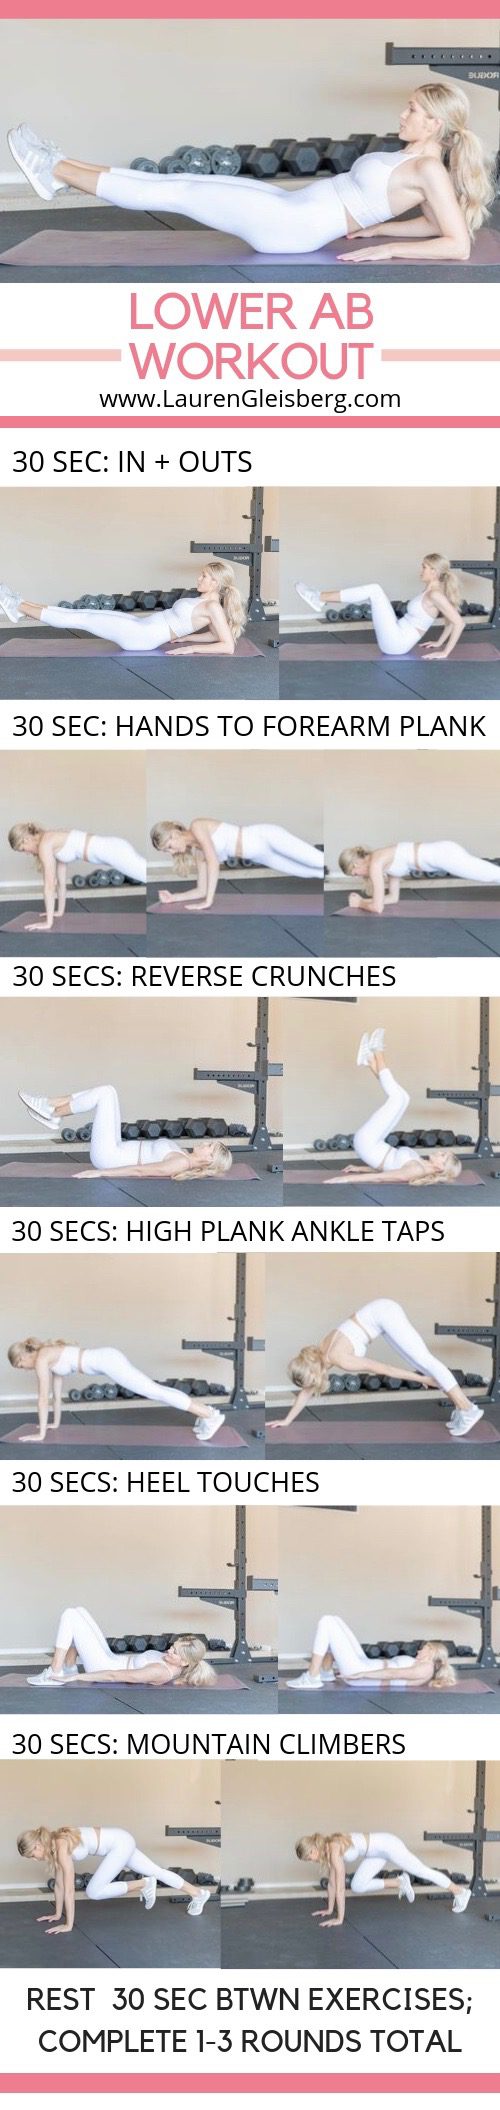 Best Lower Ab Workout That Only Takes 6 Minutes Lauren Gleisberg